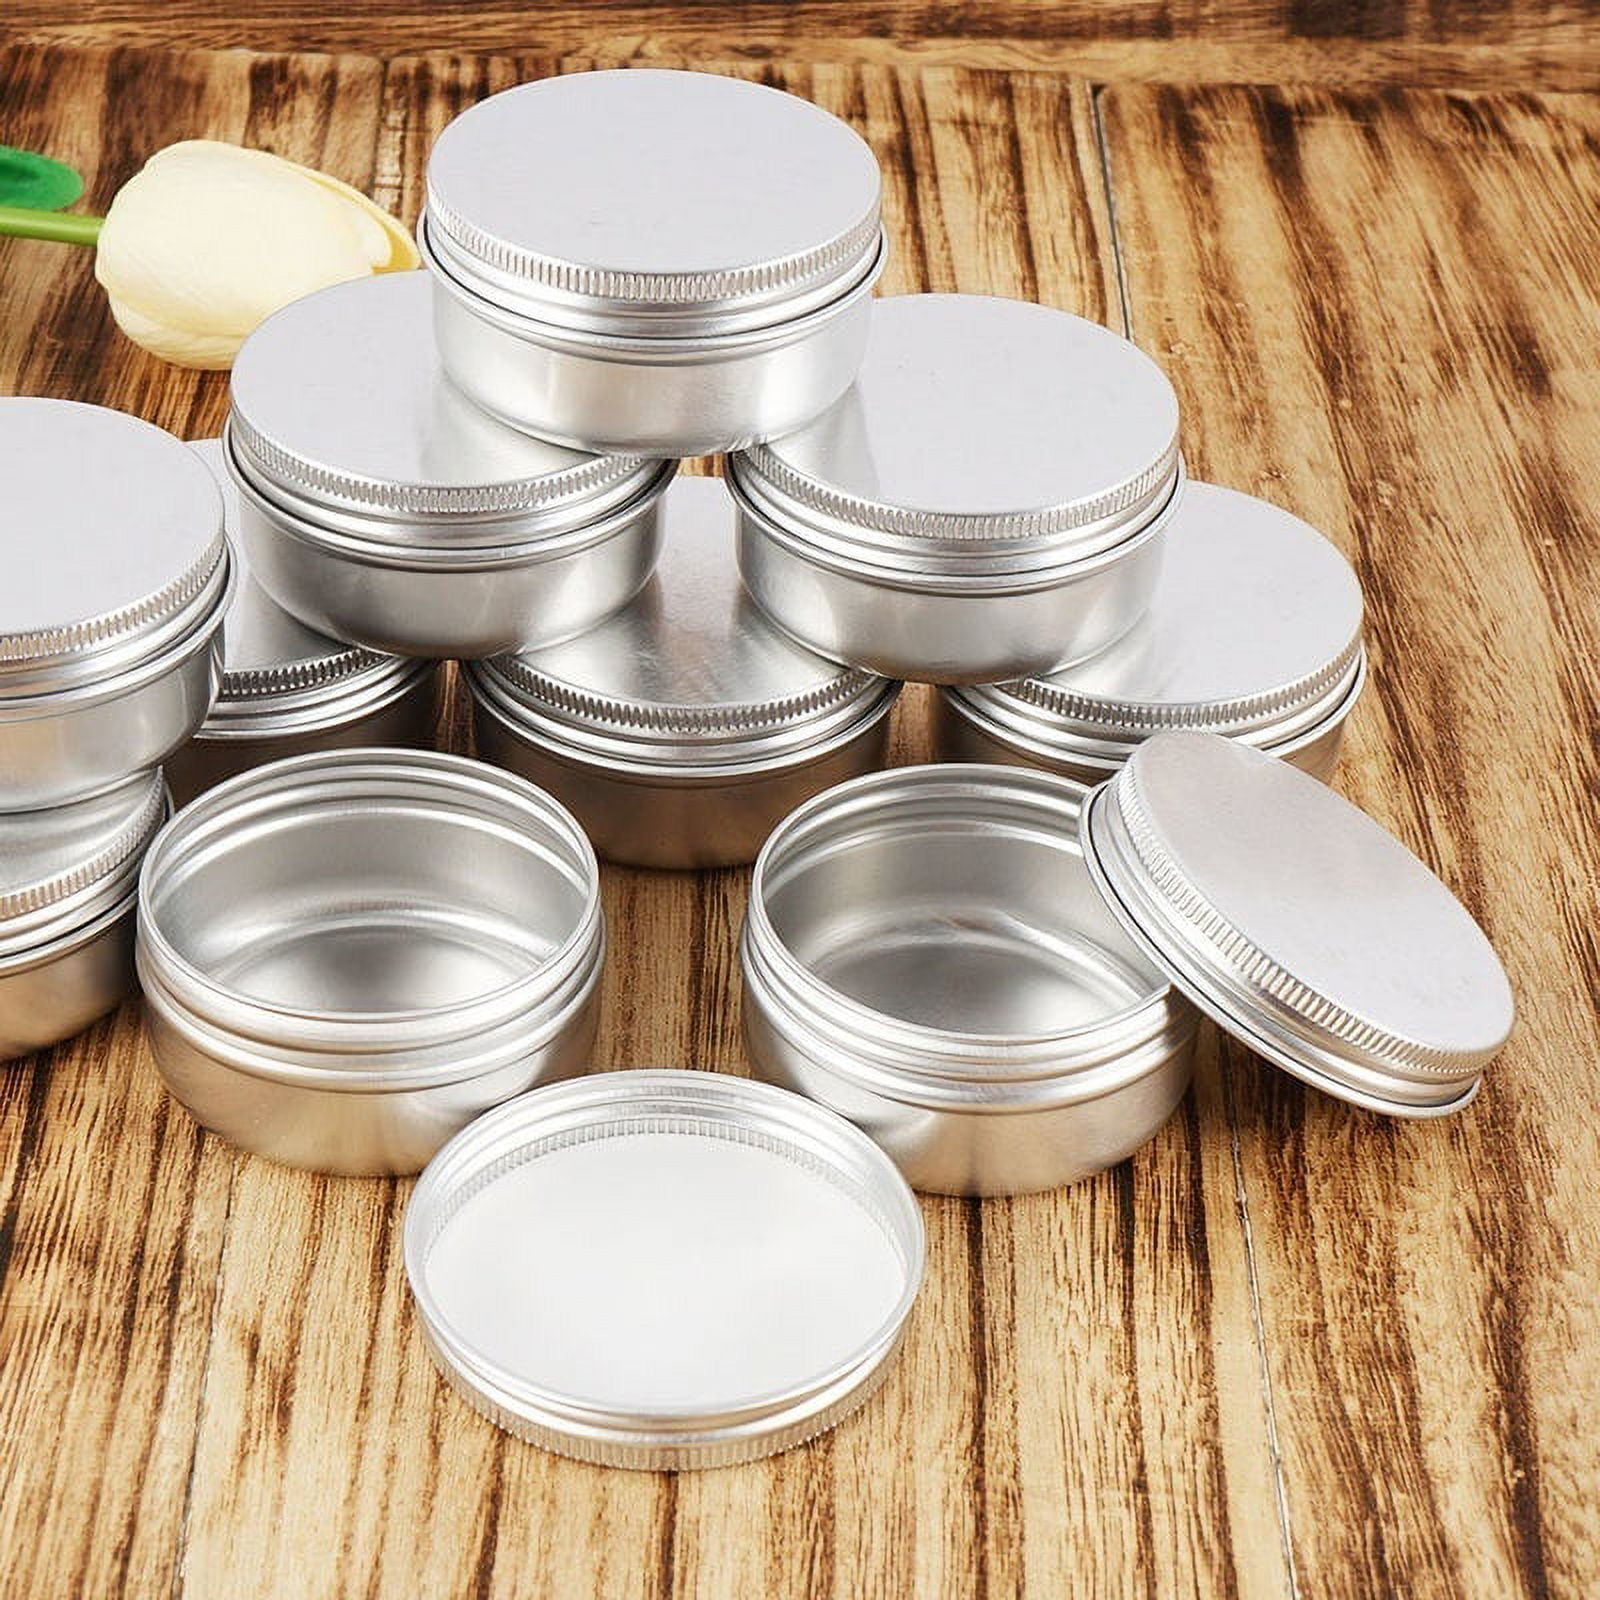 Can It - Our Metal Ointment Tins are manufactured in